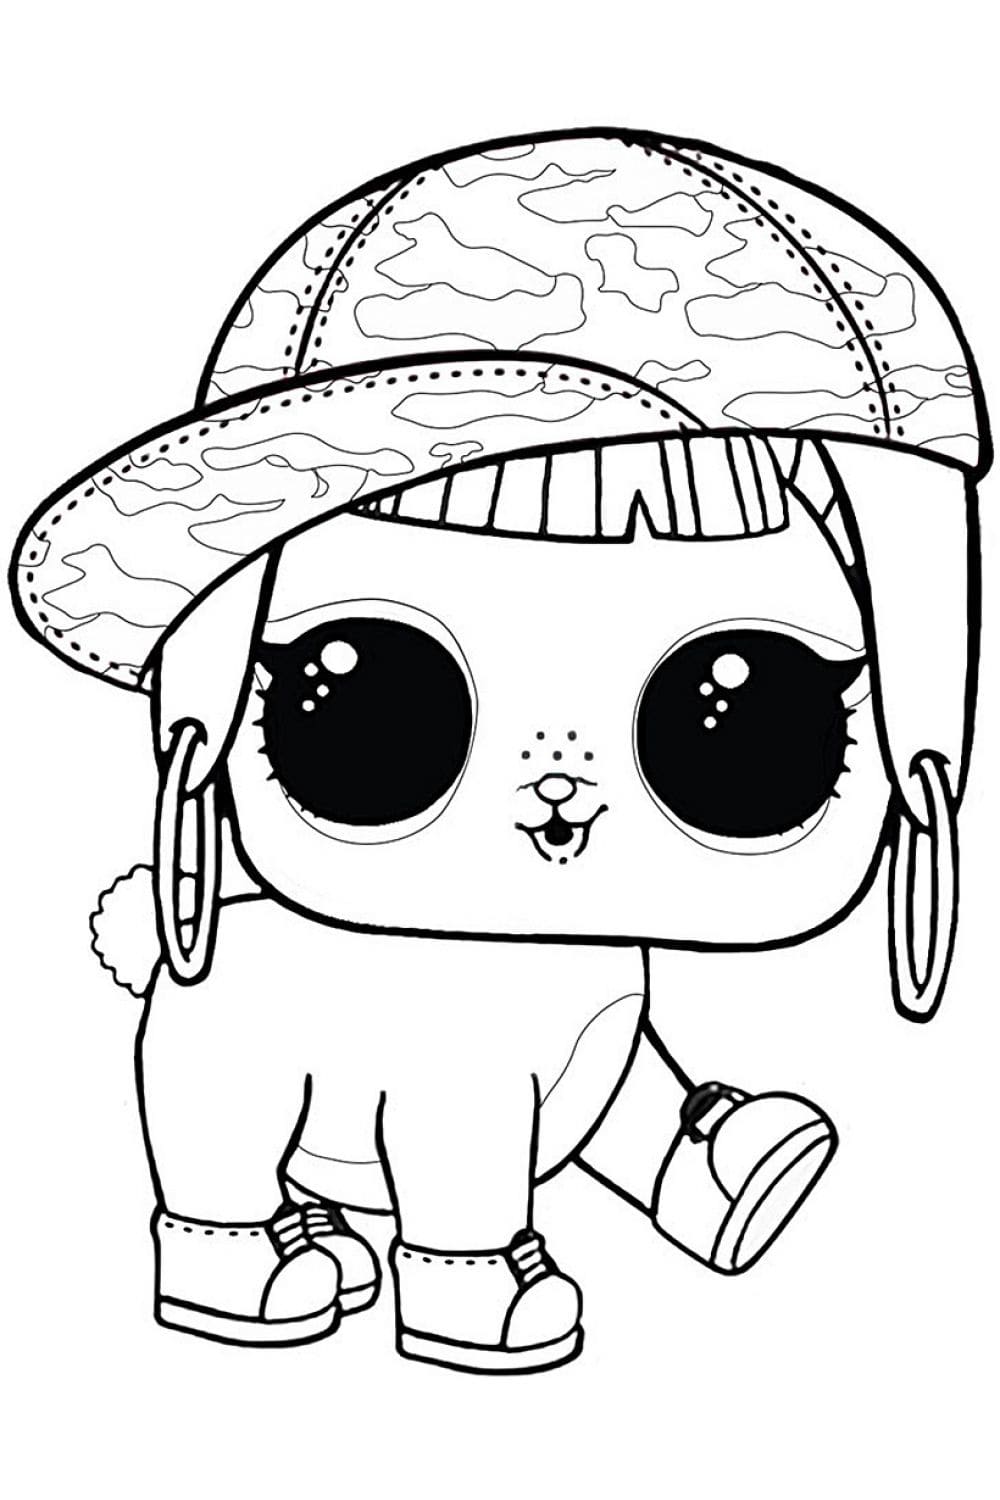 Crystal Bunny Lol Pets Coloring Page - Free Printable Coloring Pages